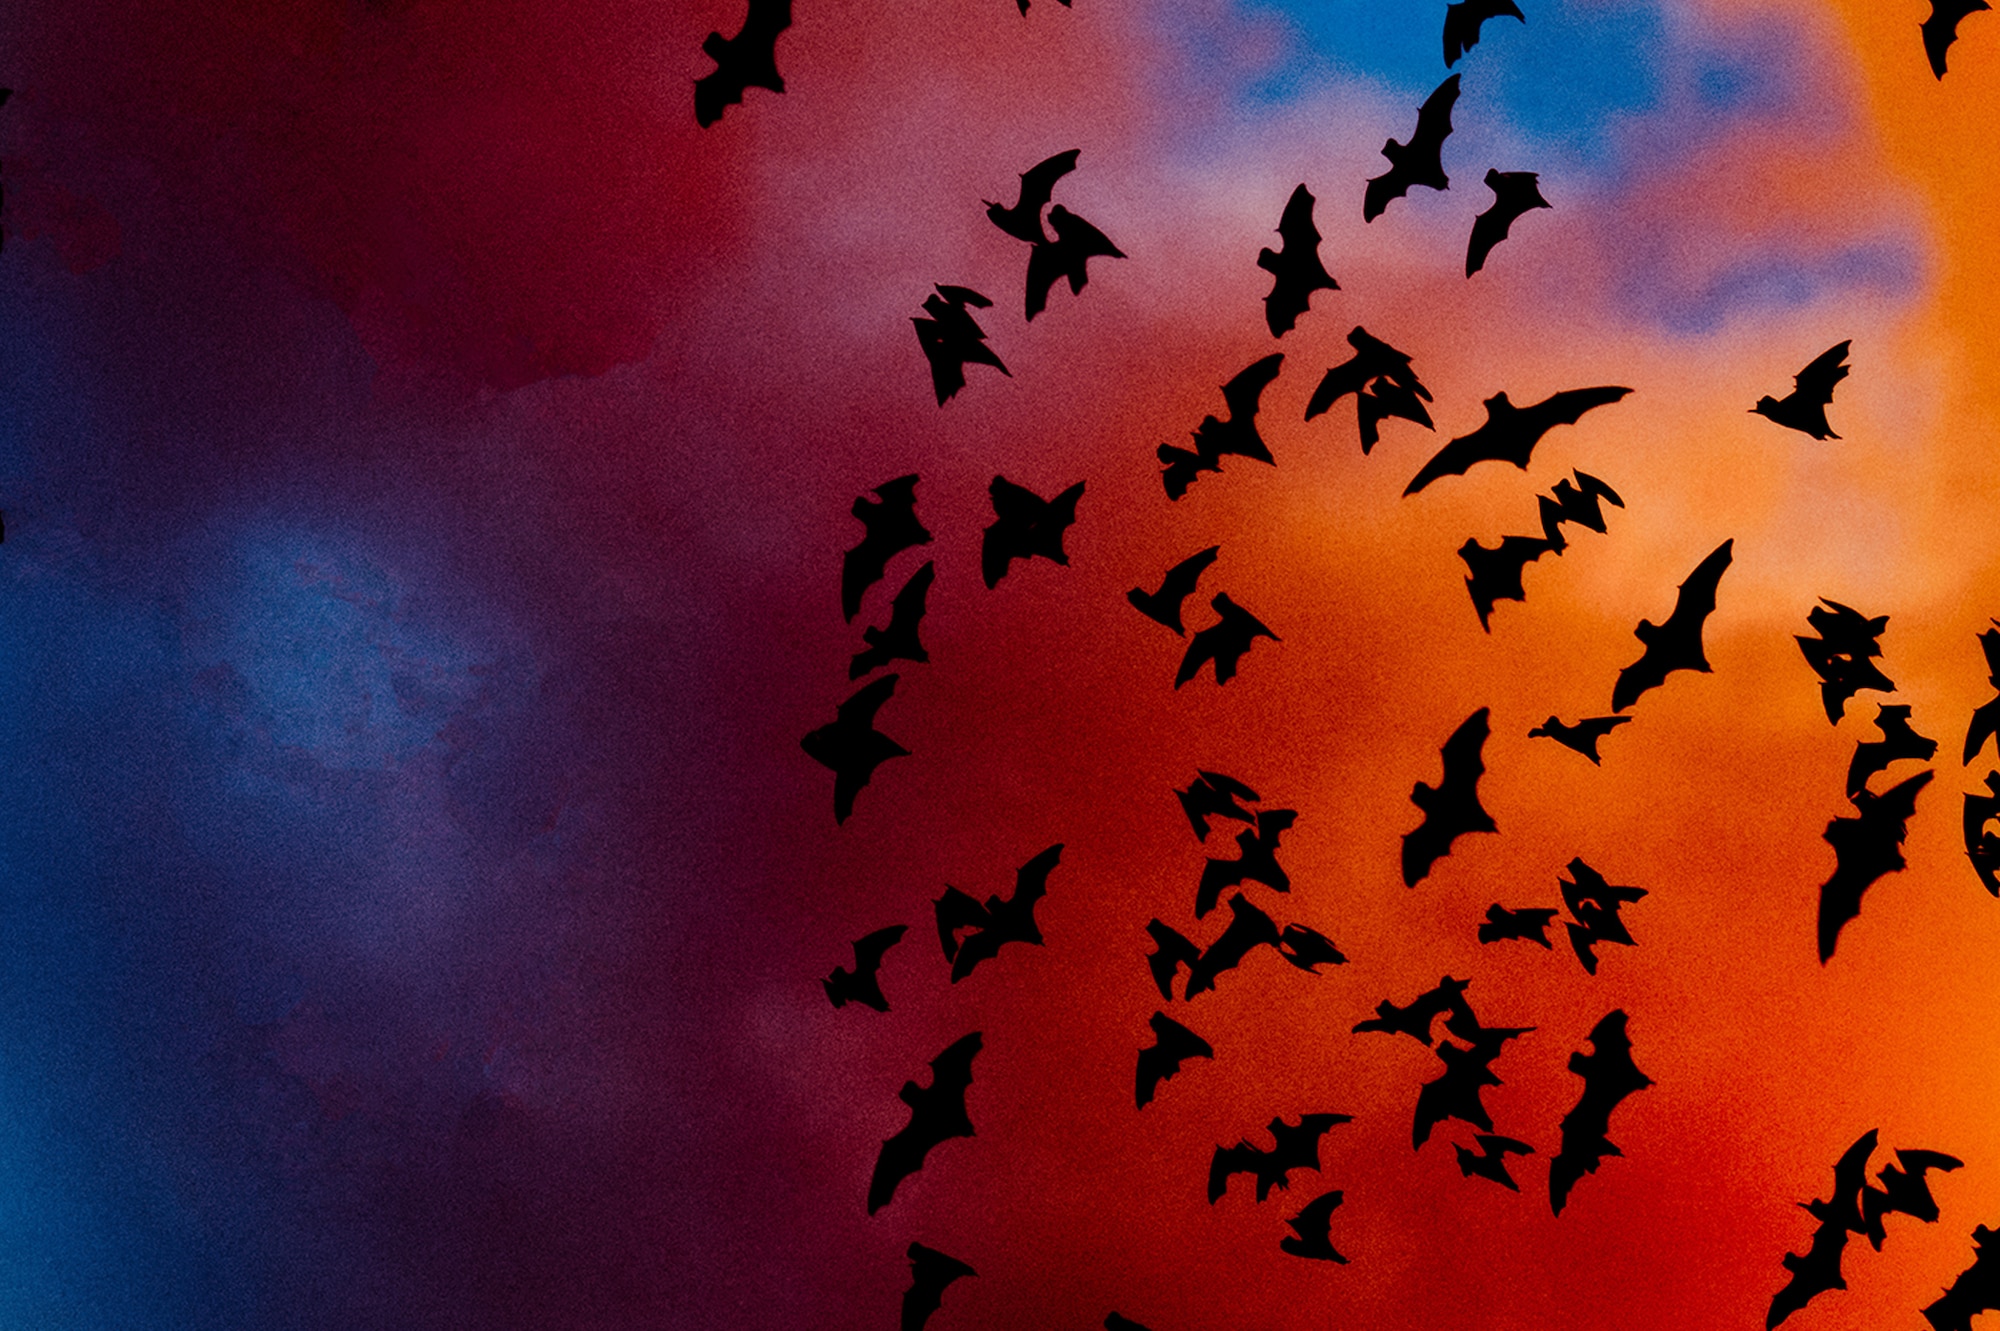 Located about 11 miles northwest of Joint Base San Antonio-Randolph, Texas, is the true “bat cave.” Bracken Cave nests millions of migratory Mexican free-tailed bats from March to October and is the largest bat and mammalian colony on earth. (U.S. Air Force photo illustration by Tech. Sgt. Samuel Benedet/Released)